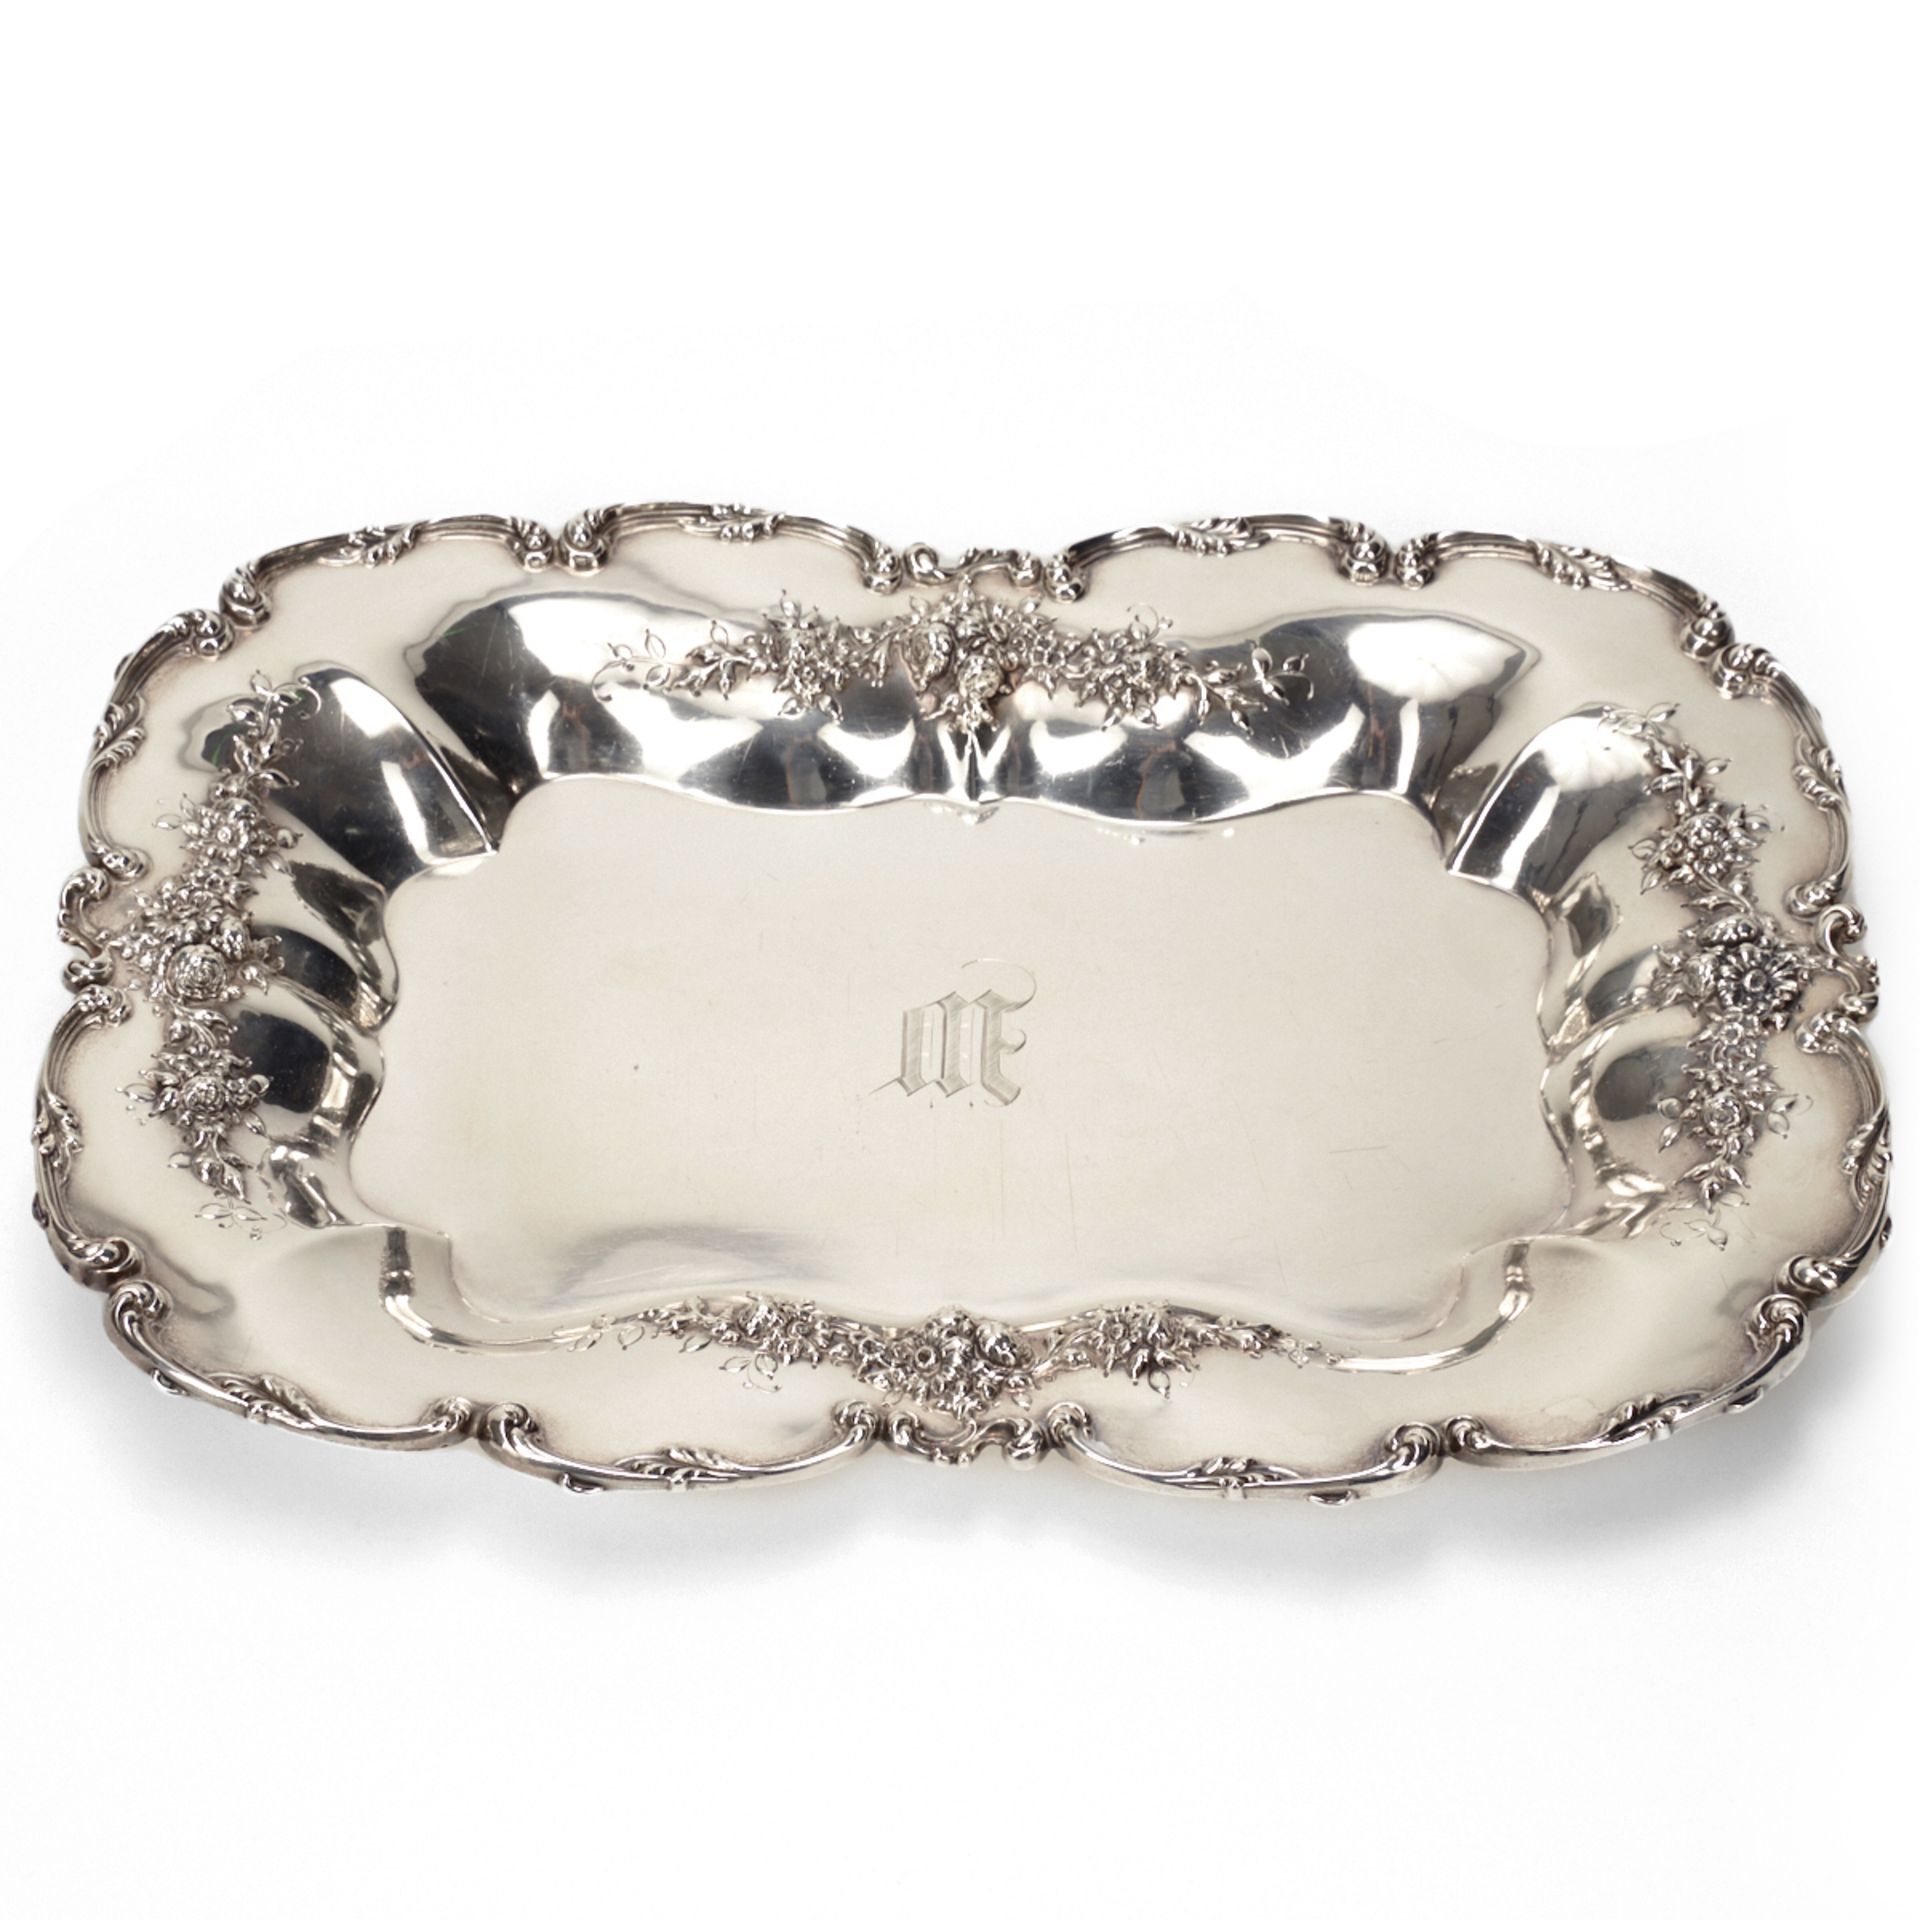 Grp: 4 Sterling Silver Bowls and Tray - J.B. Hudson Pairpoint - Image 3 of 8